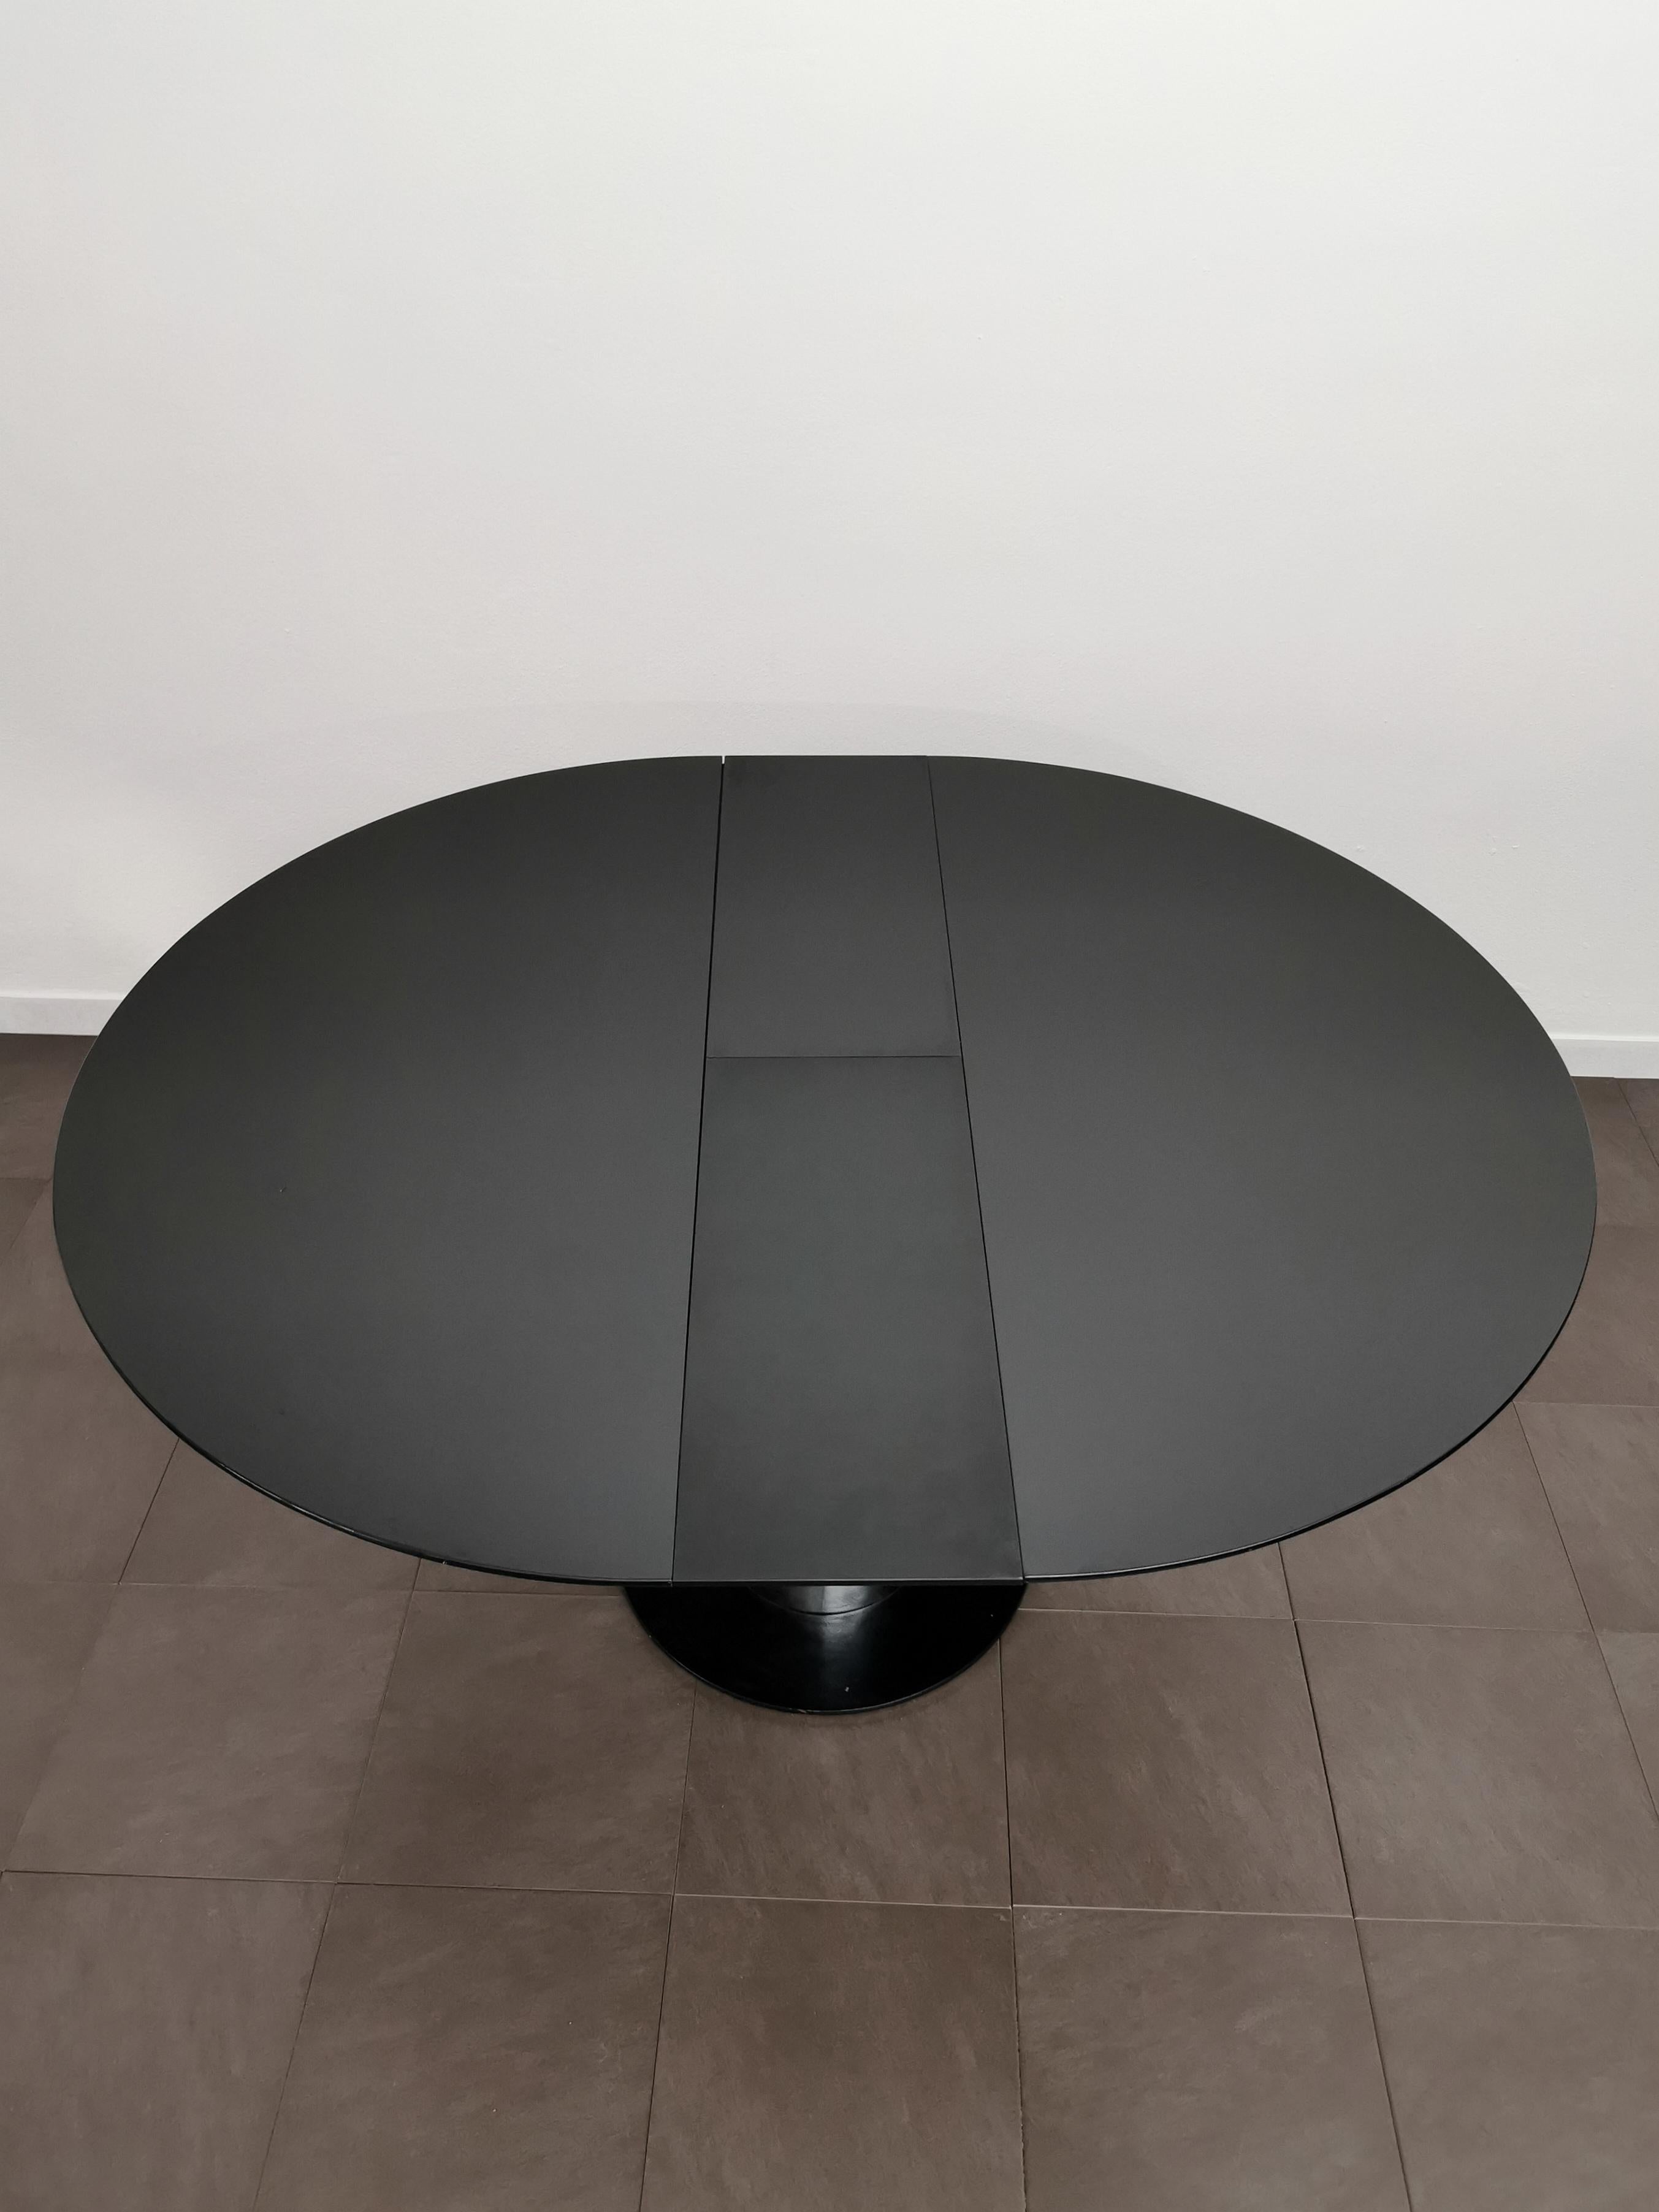 Mid Century Dining Table Wood Enameled Black Chromed Metal Italian Design, 1970s In Good Condition For Sale In Palermo, IT